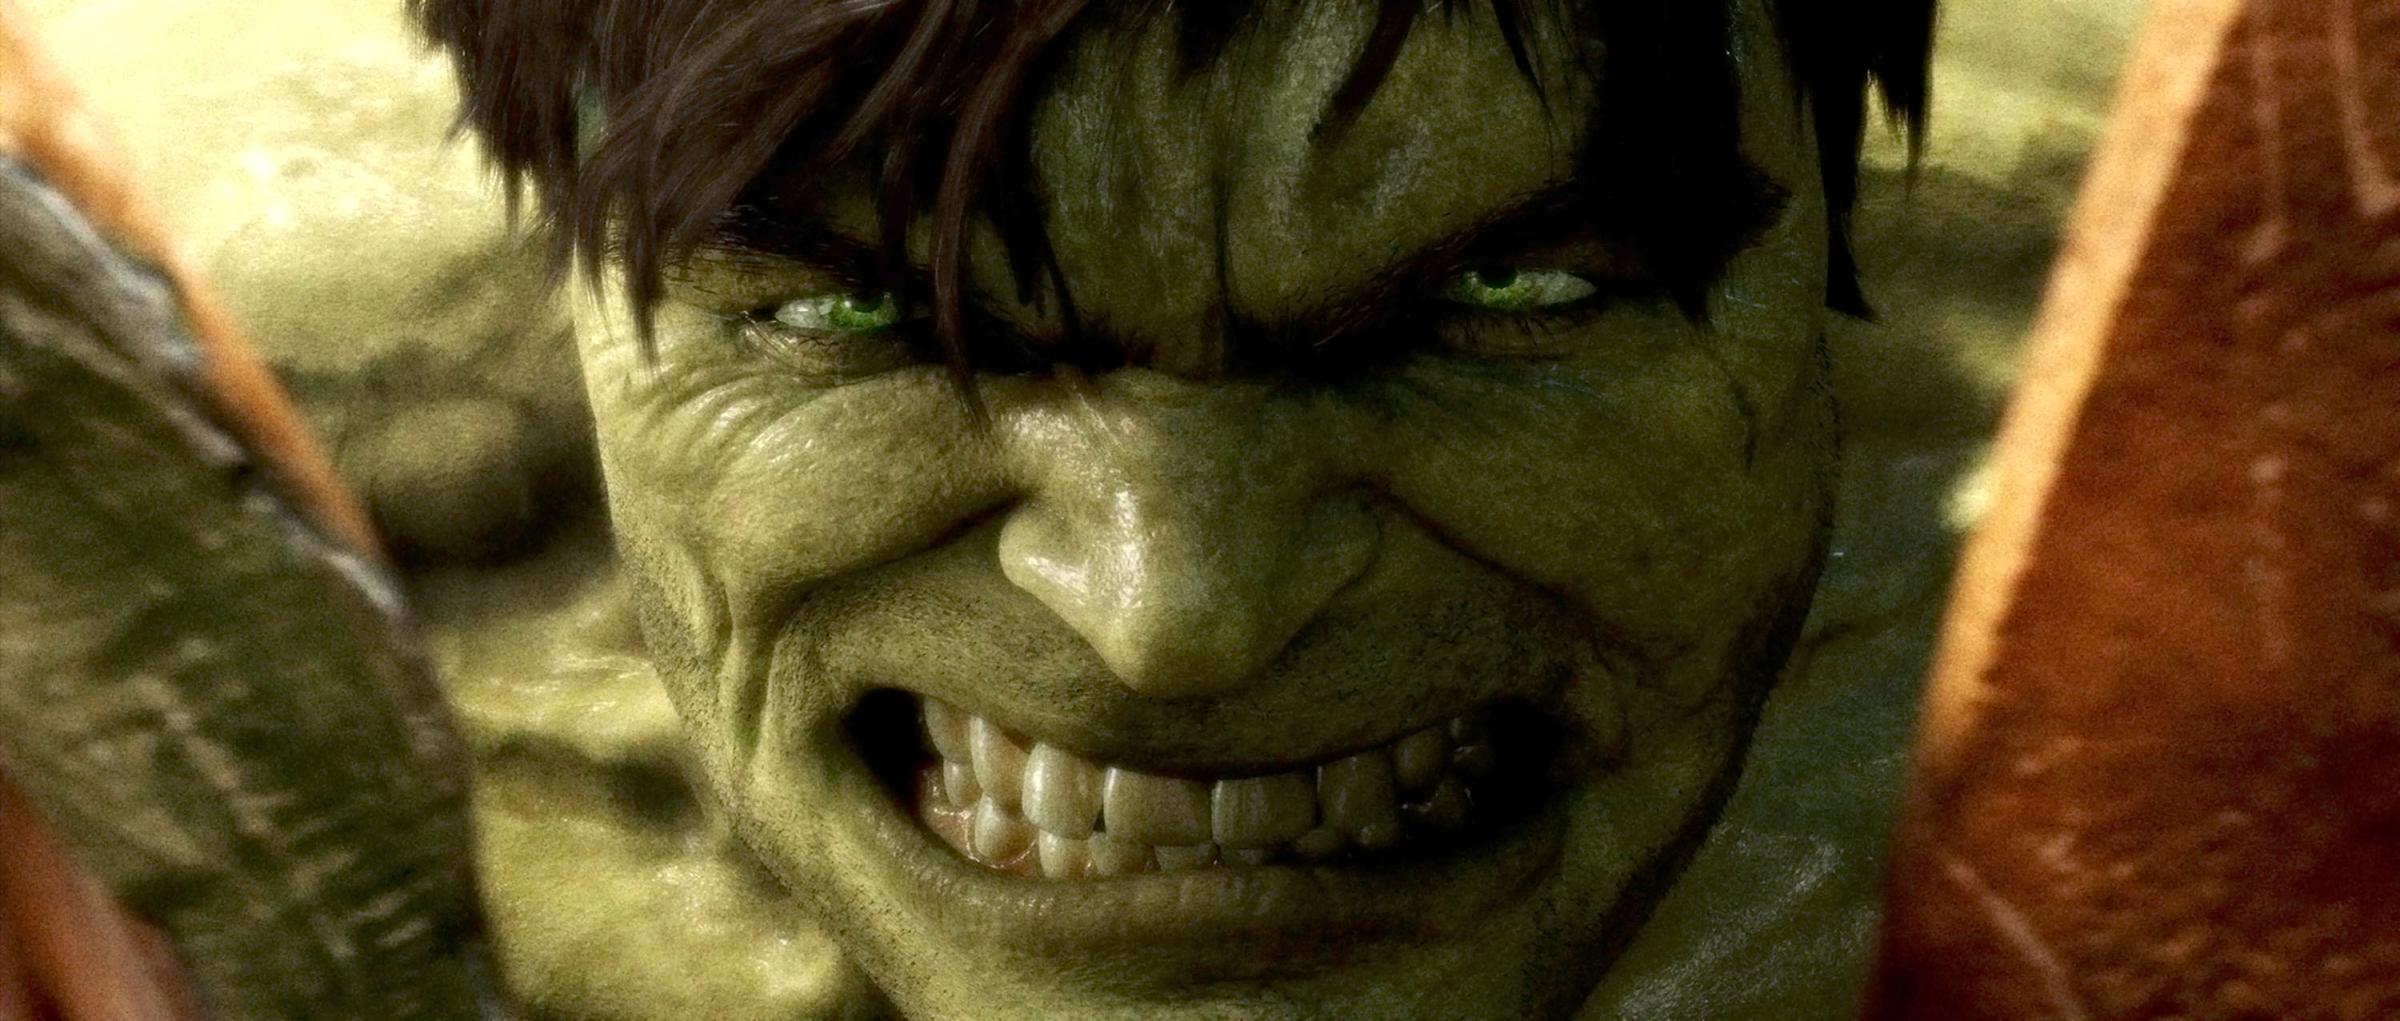 THE INCREDIBLE HULK, 2008. ©Universal/courtesy Everett Collection